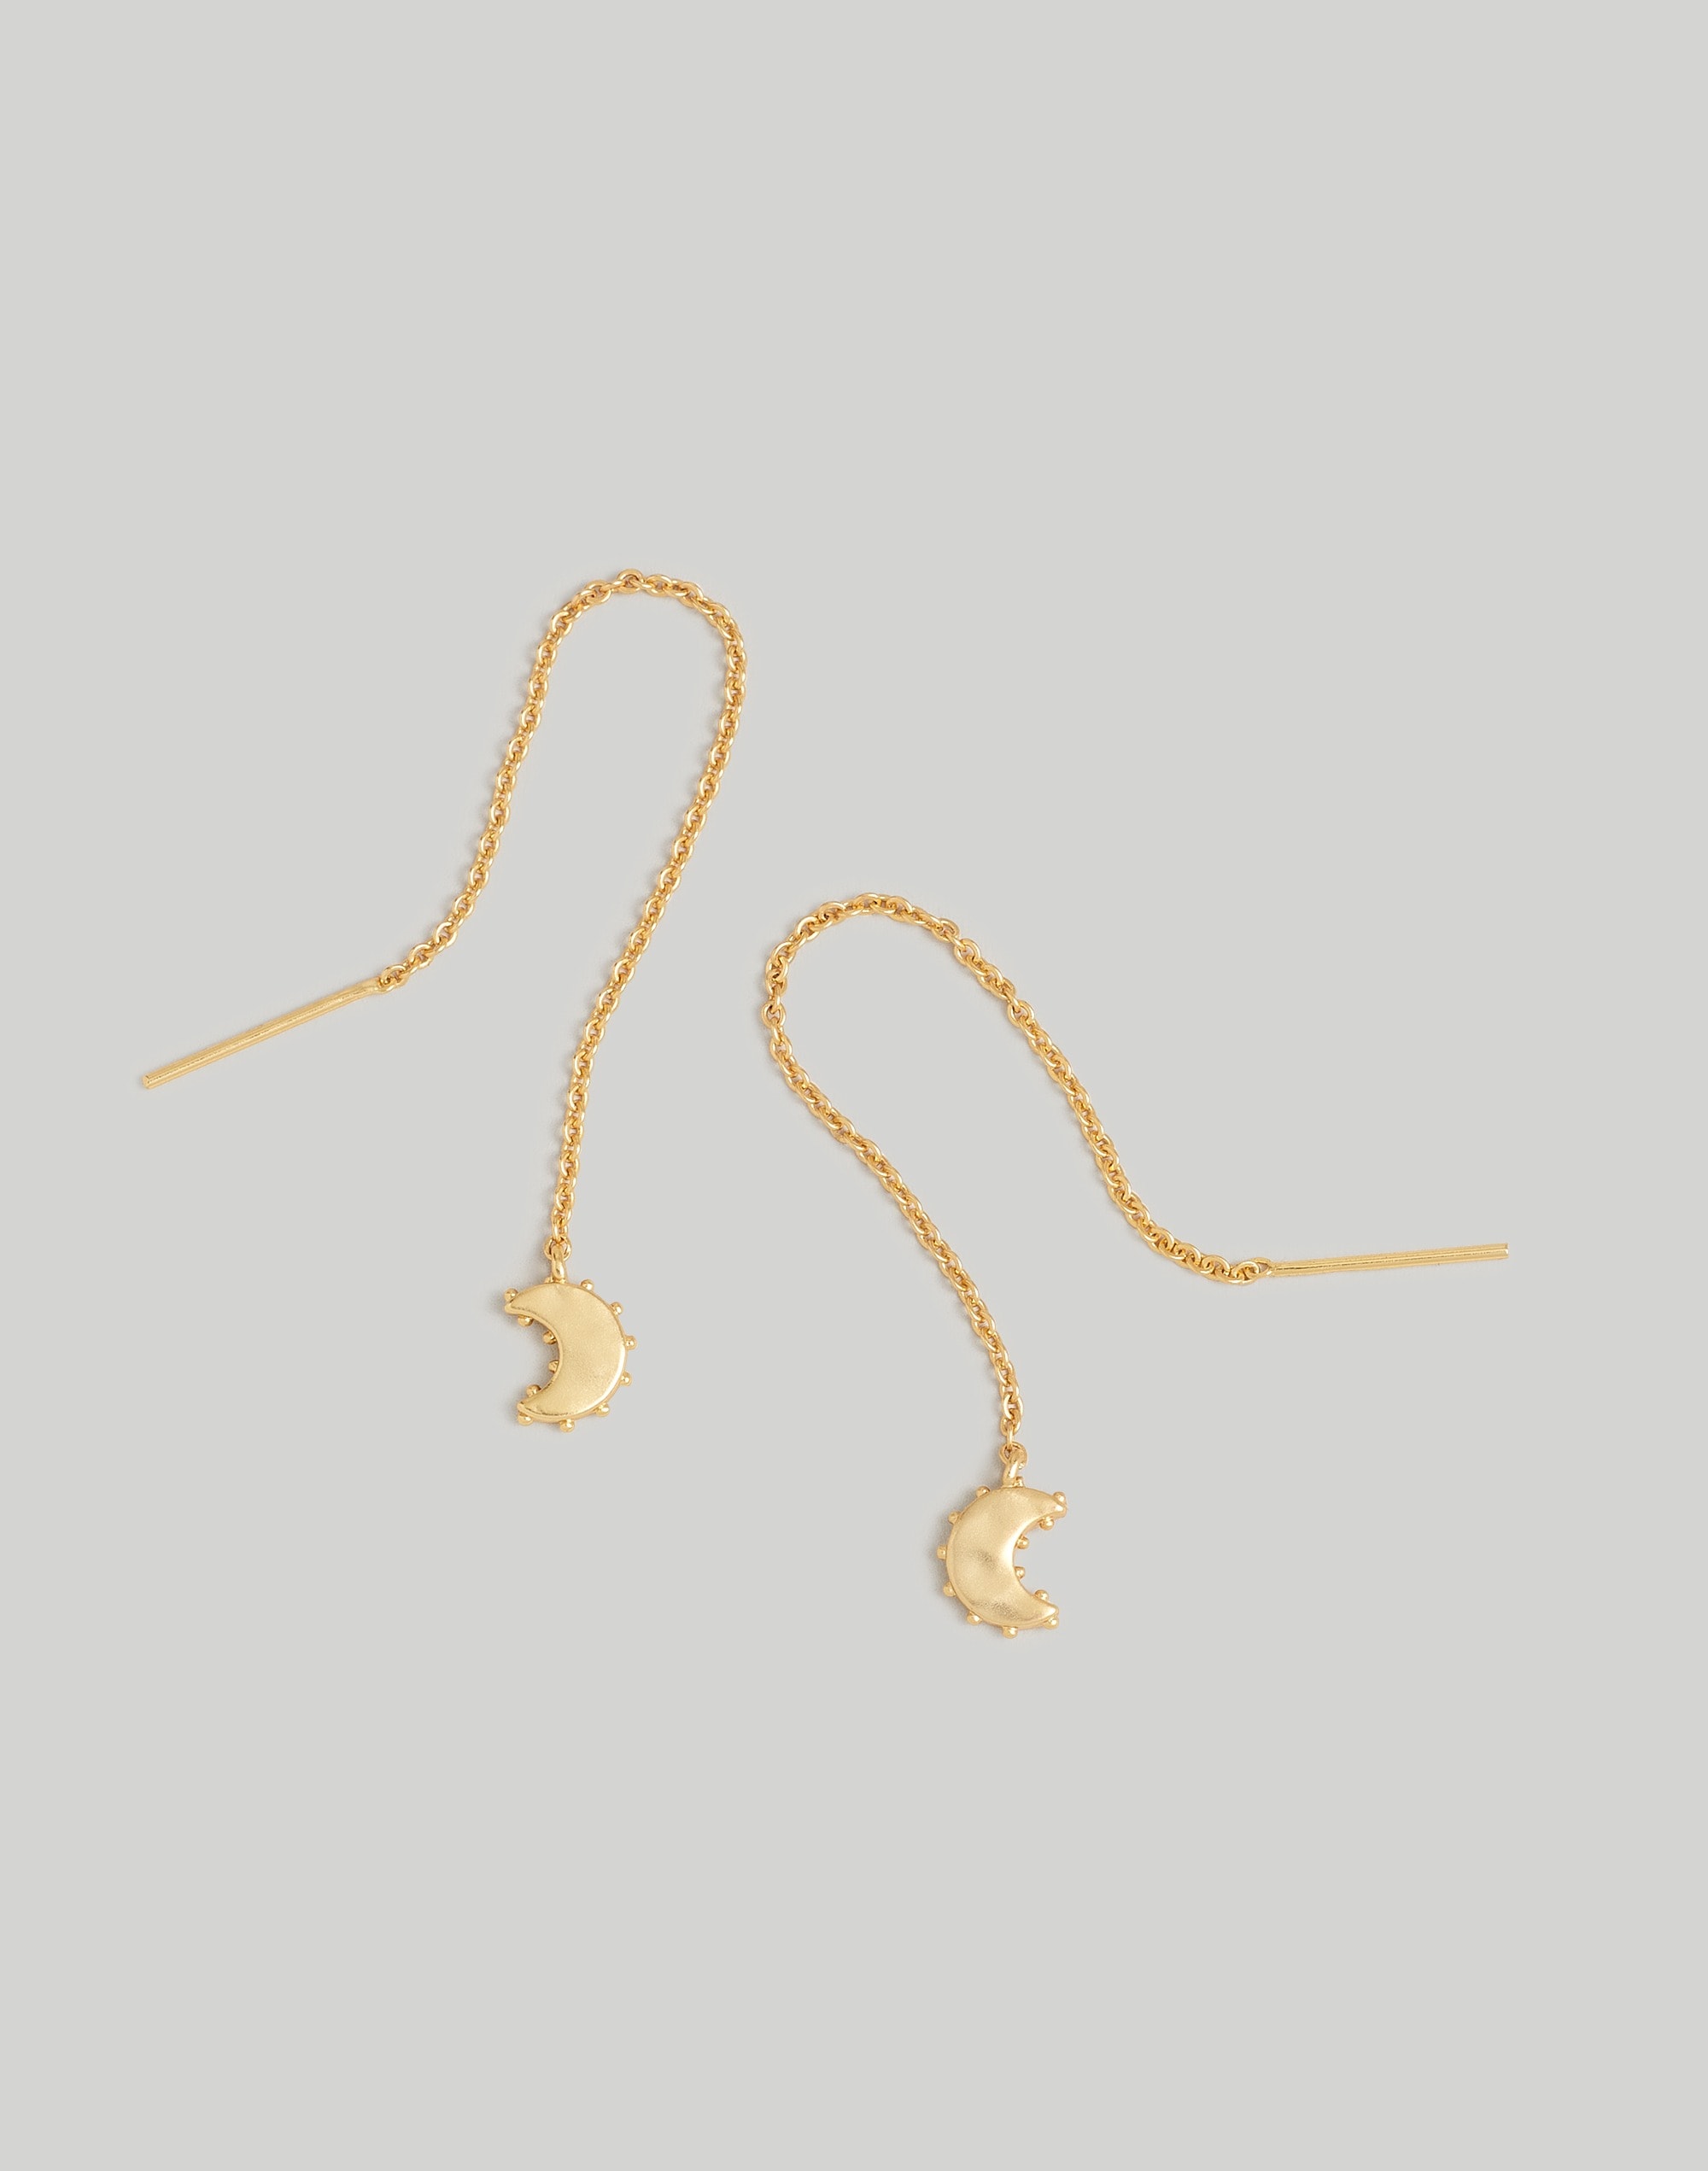 Mw Dotted Moon Threader Earrings In Vintage Gold